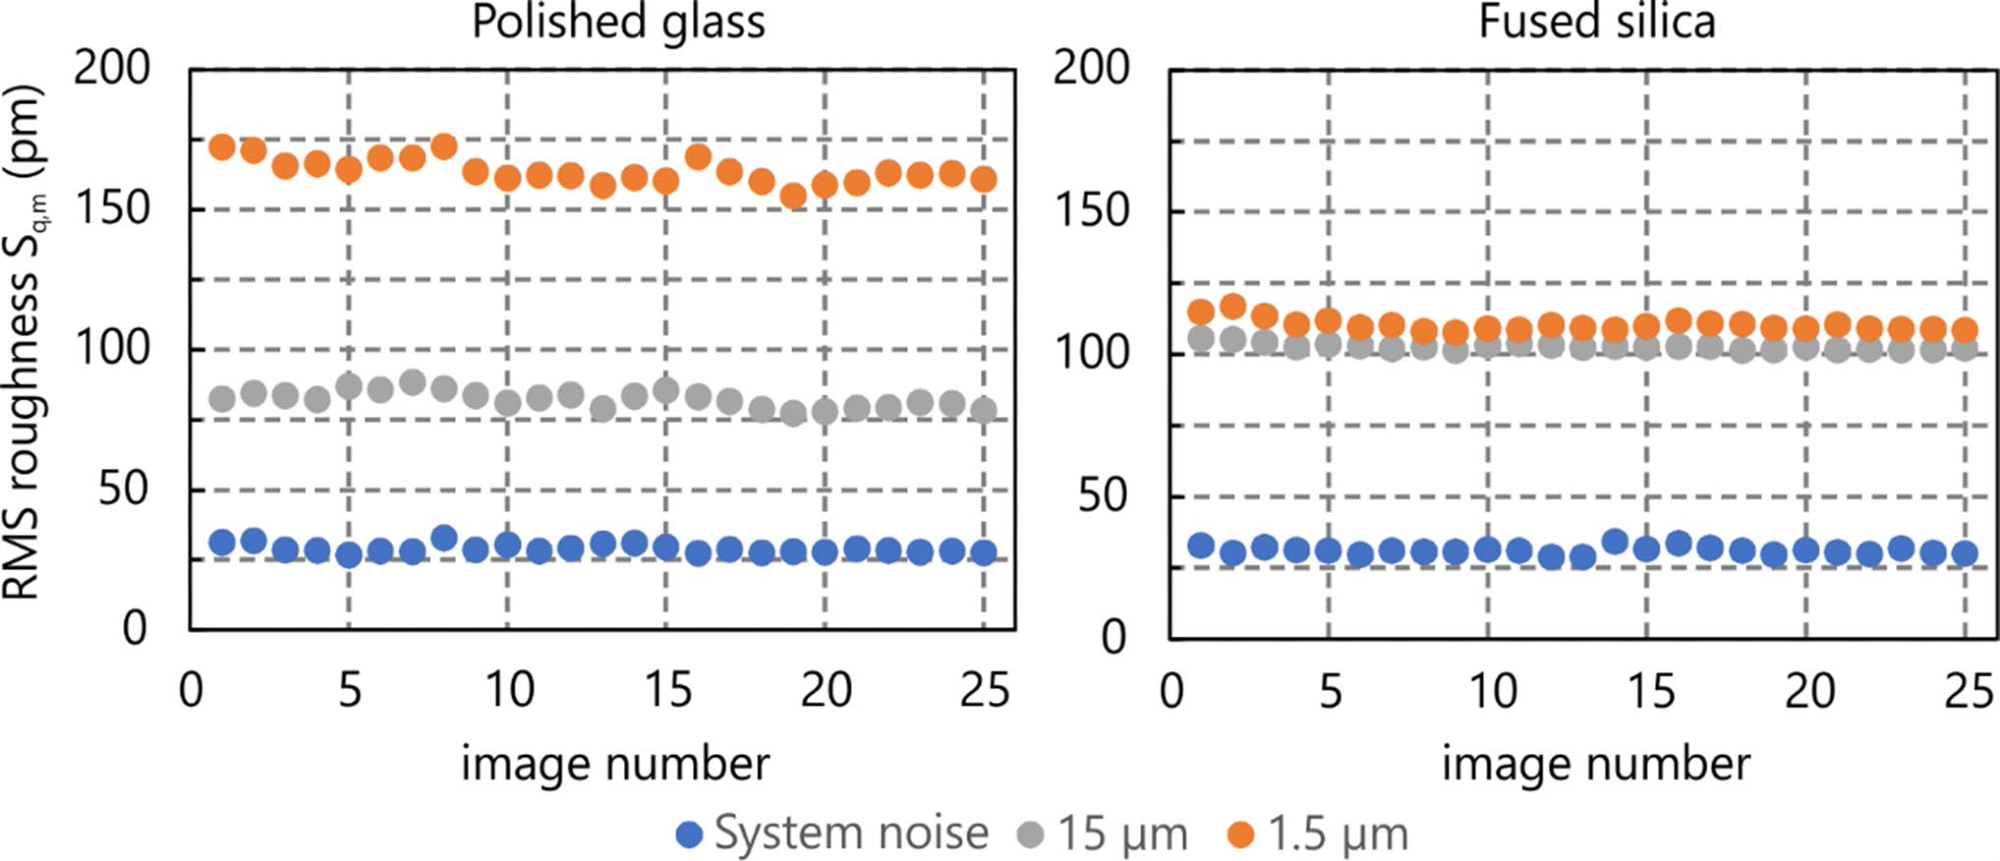 Repeatability of surface roughness measurements. 25 cycles were run, each containing height measurements with zero scan range (system noise), and scan ranges of 1.5 µm and 15 µm. Values are the measured RMS roughness values Sq,m after parabolic line-by-line background correction.